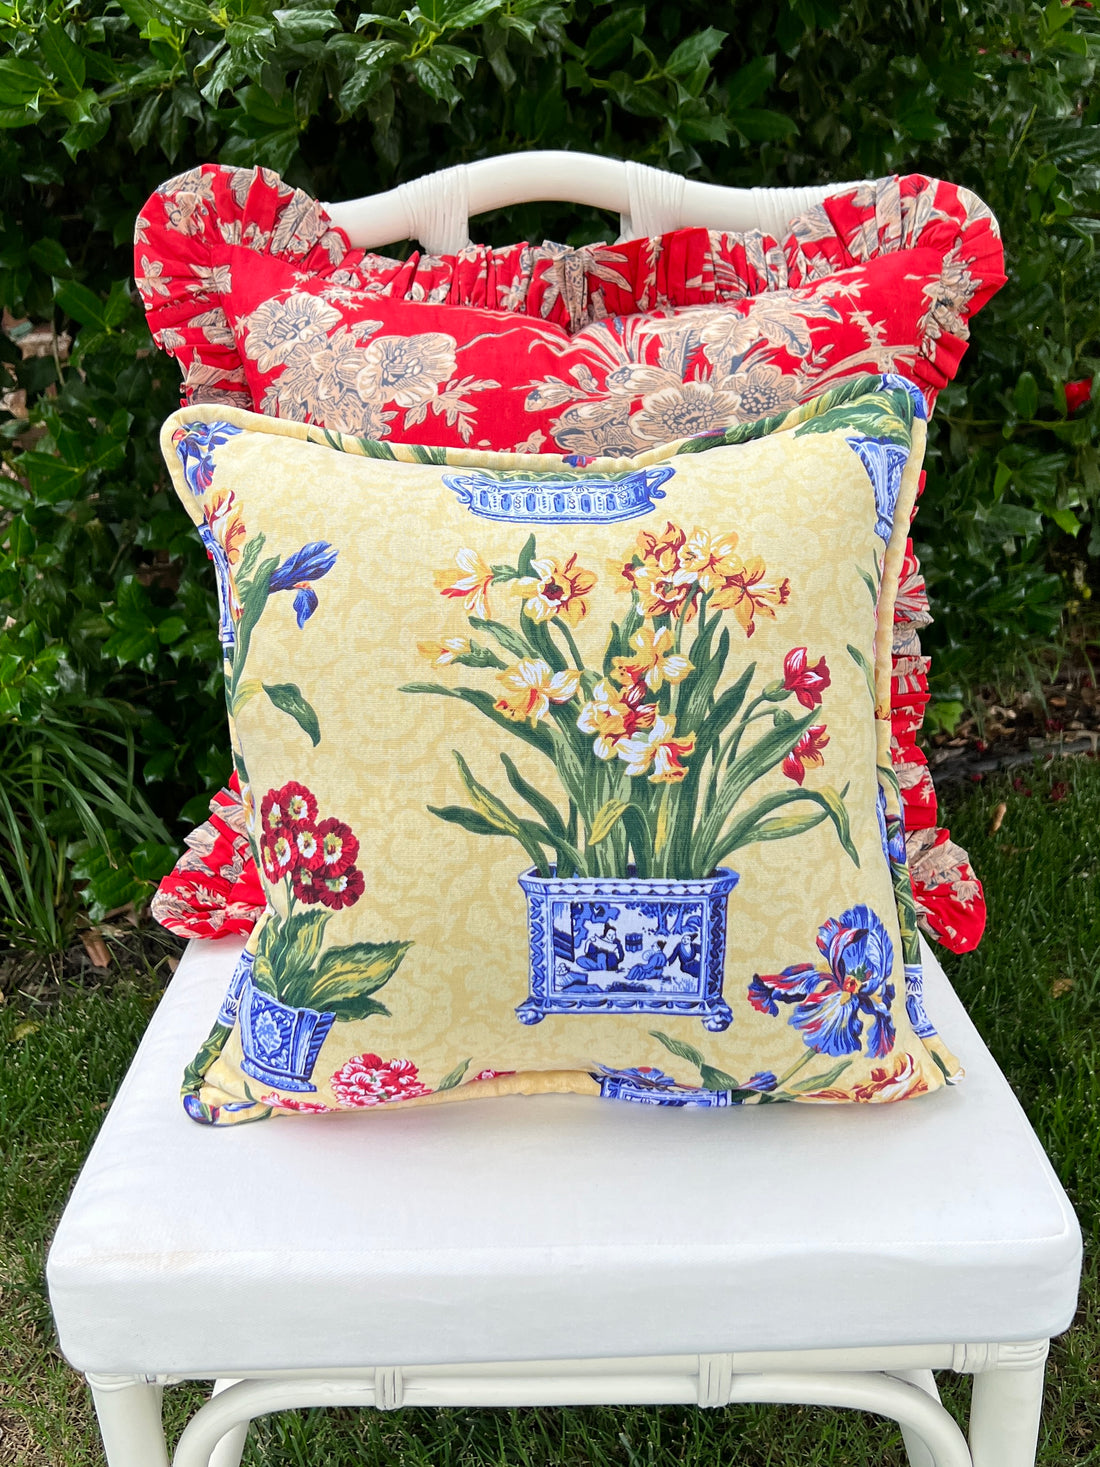 Red floral toile pillow cover with ruffle trim – Grace Harris